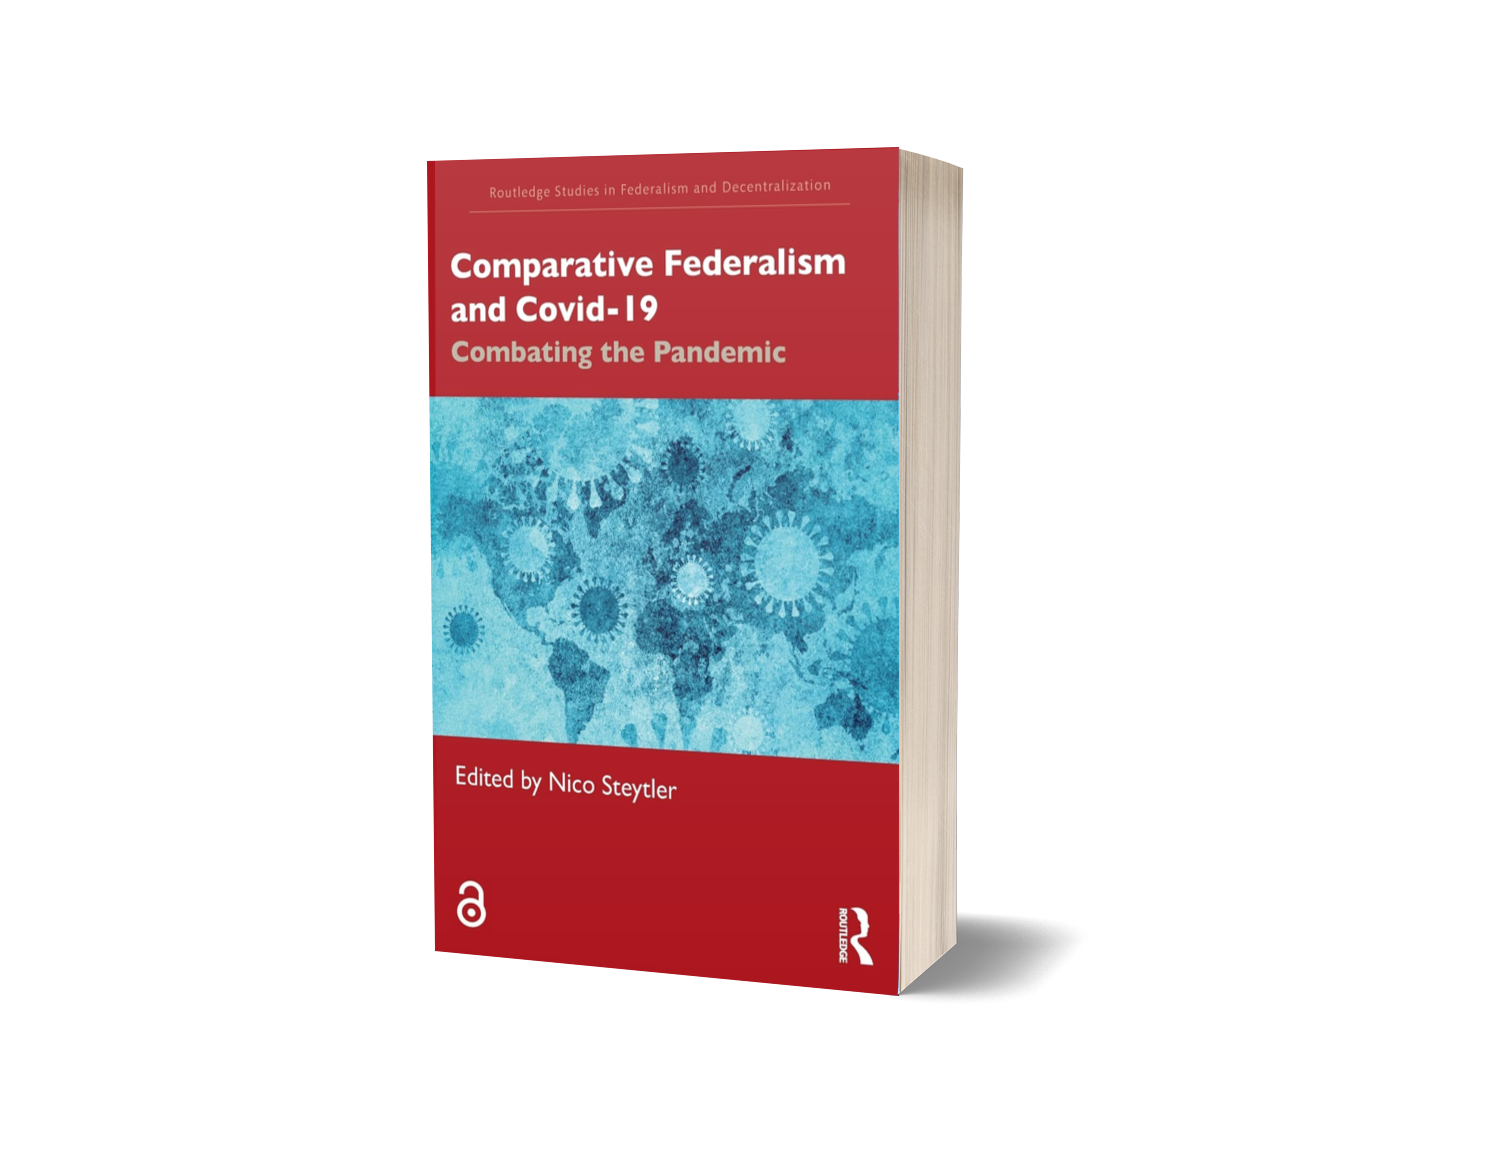 Steytler, Nico (ed.) Comparative Federalism and Covid-19: Combating the Pandemic (2022) Routledge, 433pp.